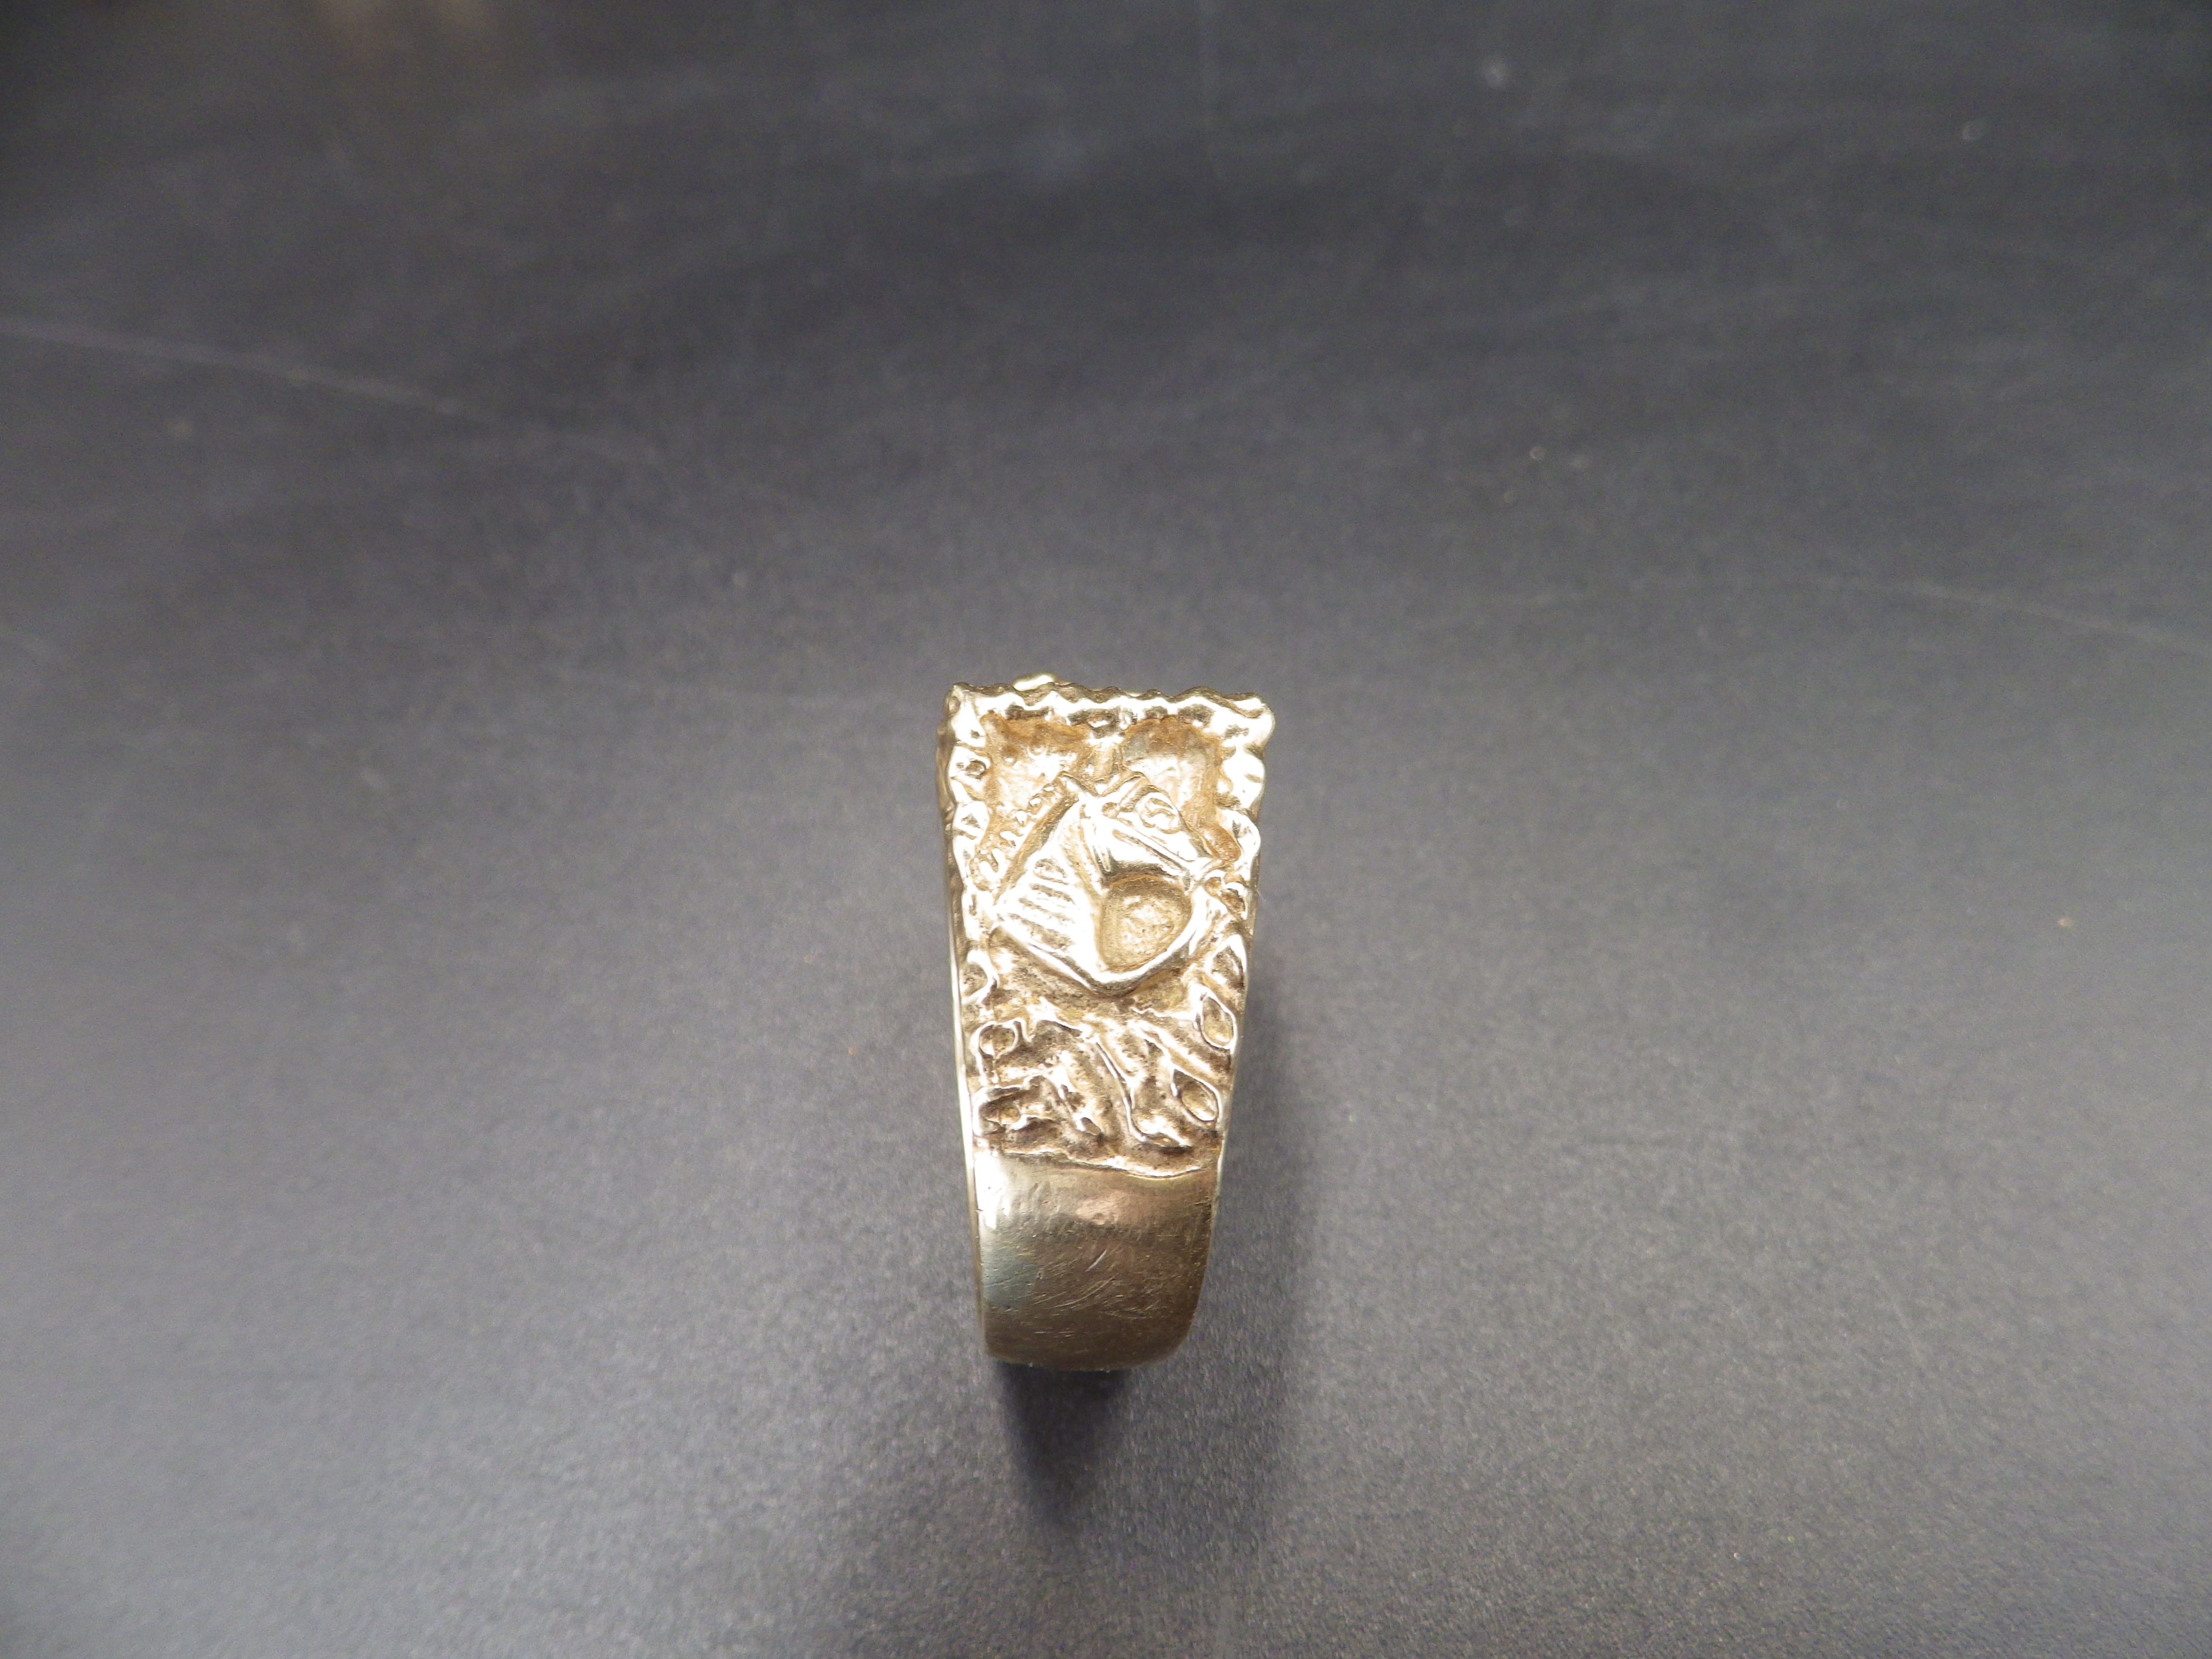 9ct gold ring with the image of a Horse head surrounded by a horseshoe, hallmarked London size X, - Image 3 of 4